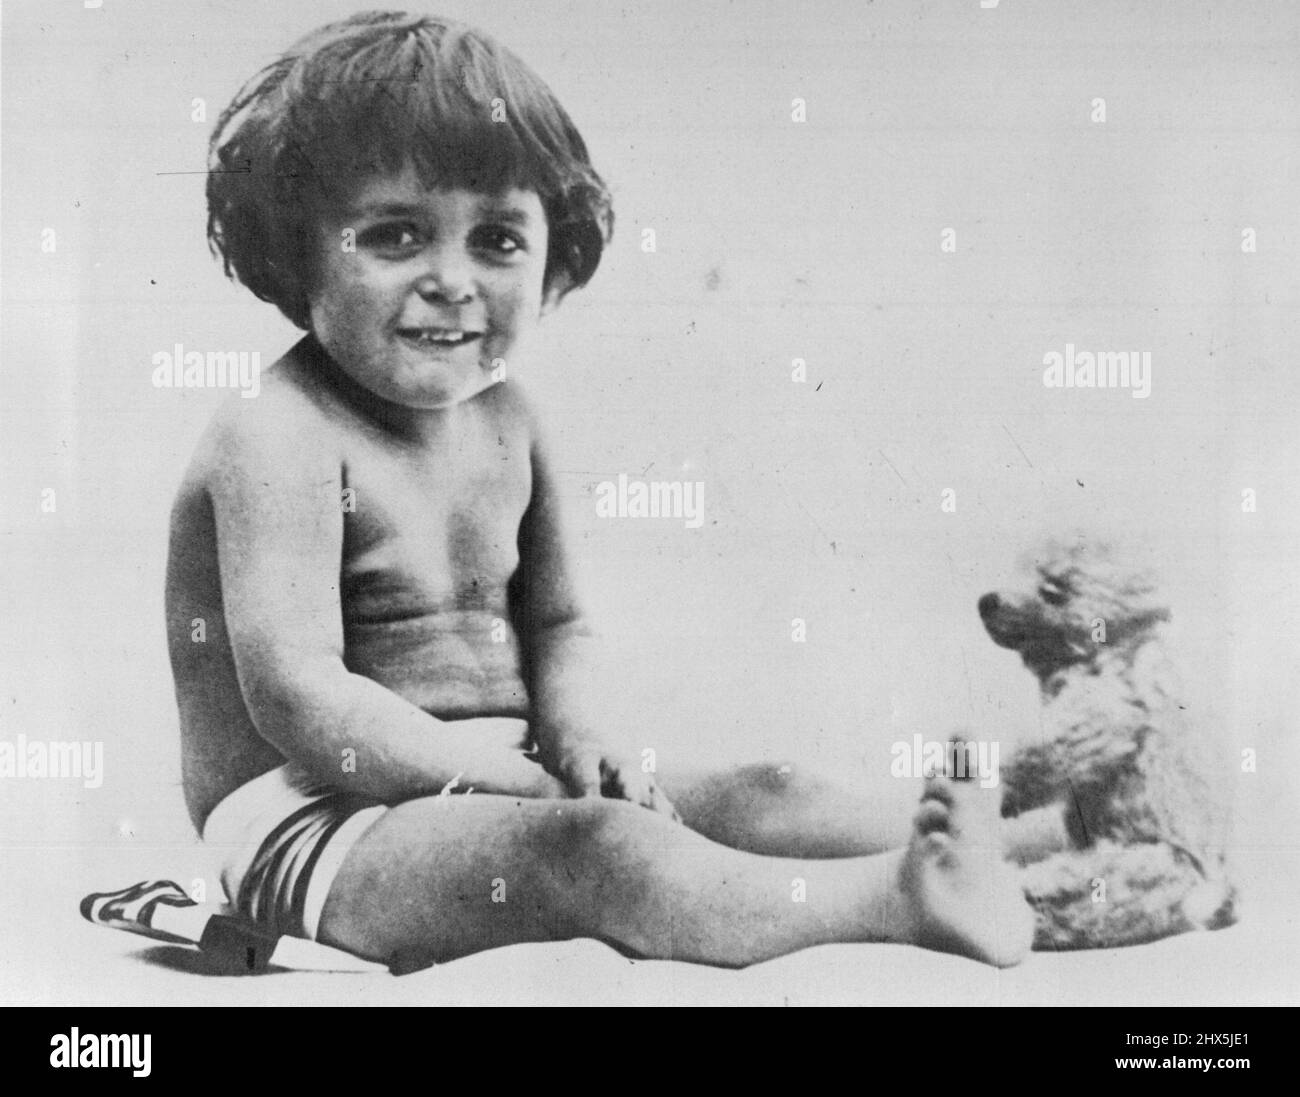 Not quite in the Shmith style, but just as appealing was this early shot taken of Shmith himself at about 18 months. The ribbon around his waist was intended to make him look like a kewpie doll. May 26, 1950. Stock Photo